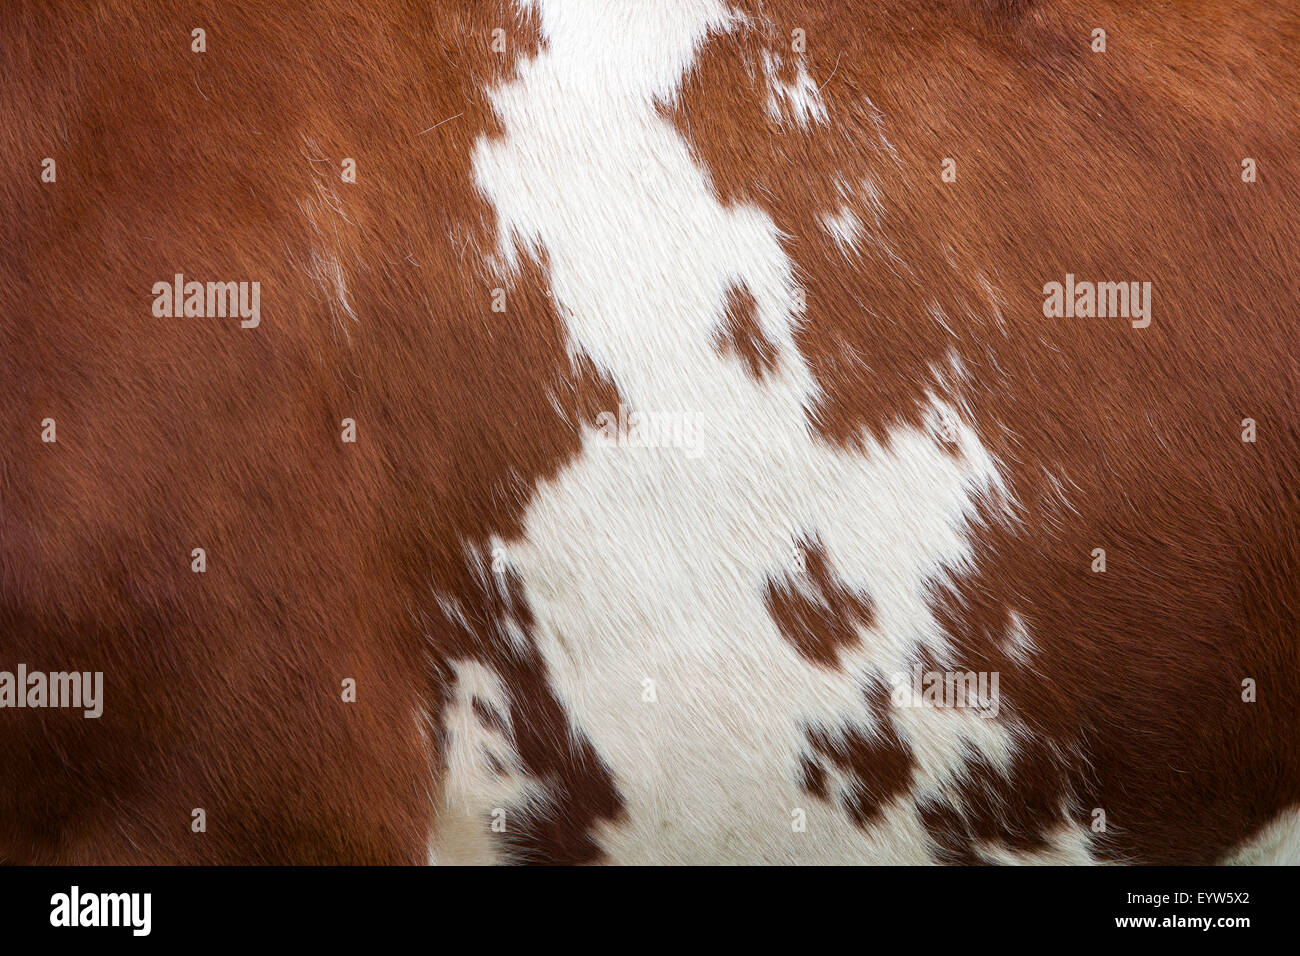 side of cow with white pattern on reddish brown hide Stock Photo